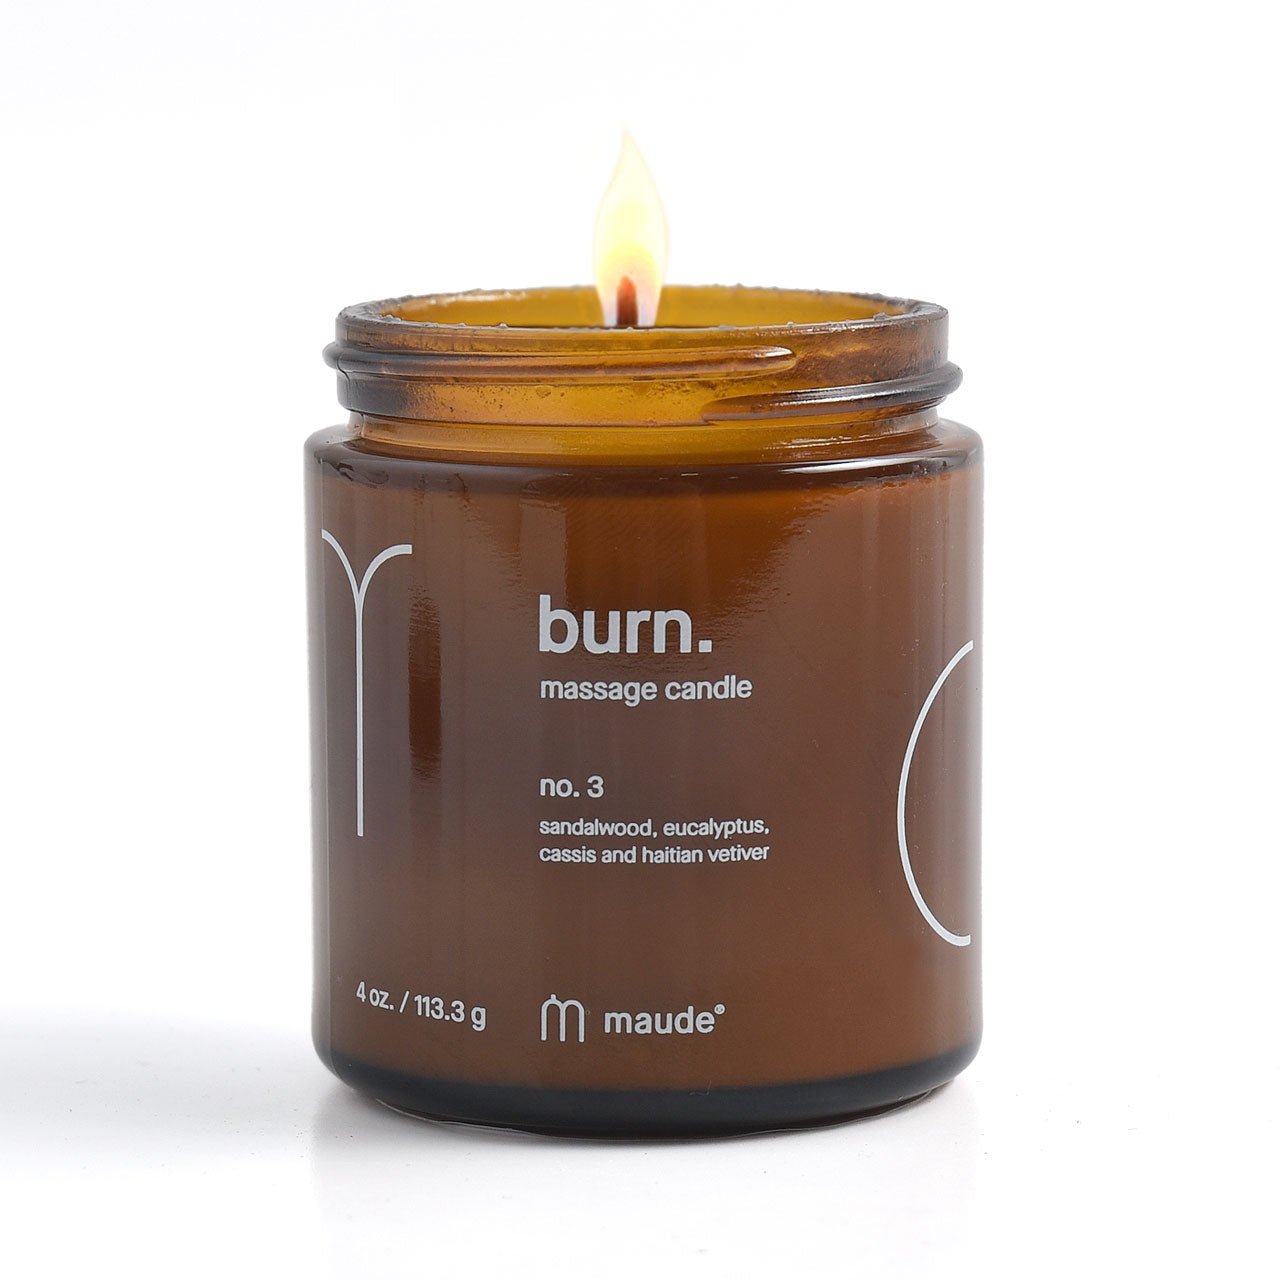 Maude Burn Massage Candle | Uncrate Supply